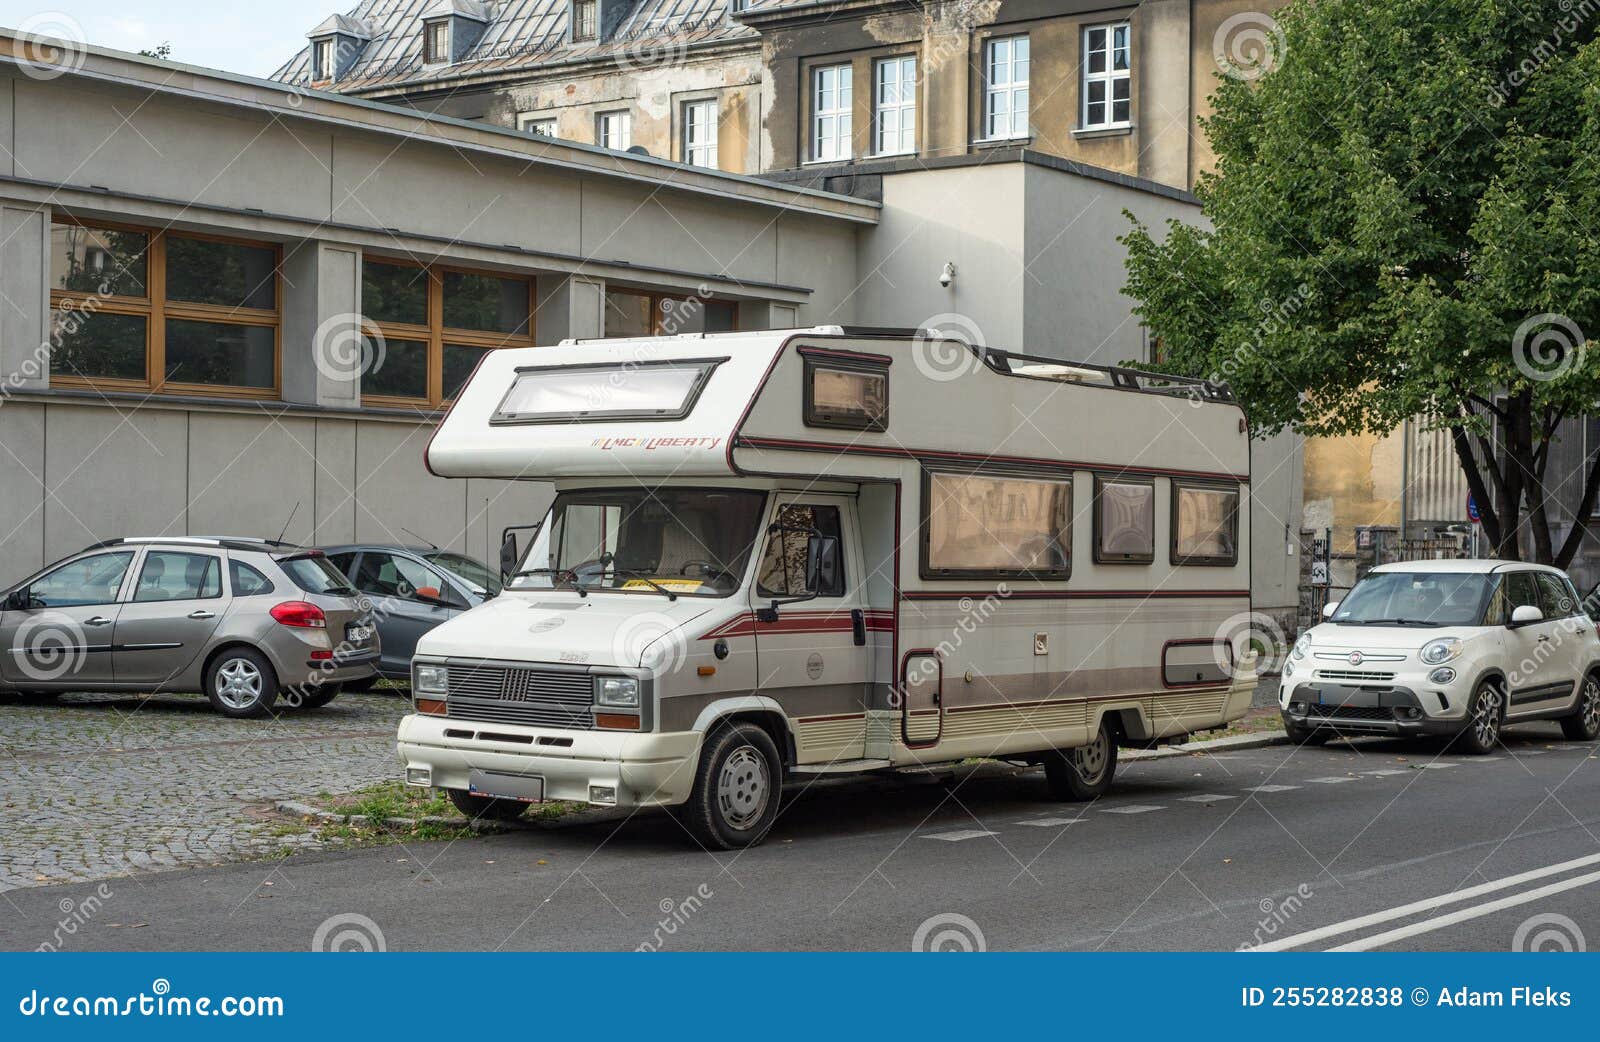 Old Italian Camper Fiat Ducato Parked on a Street Editorial Stock